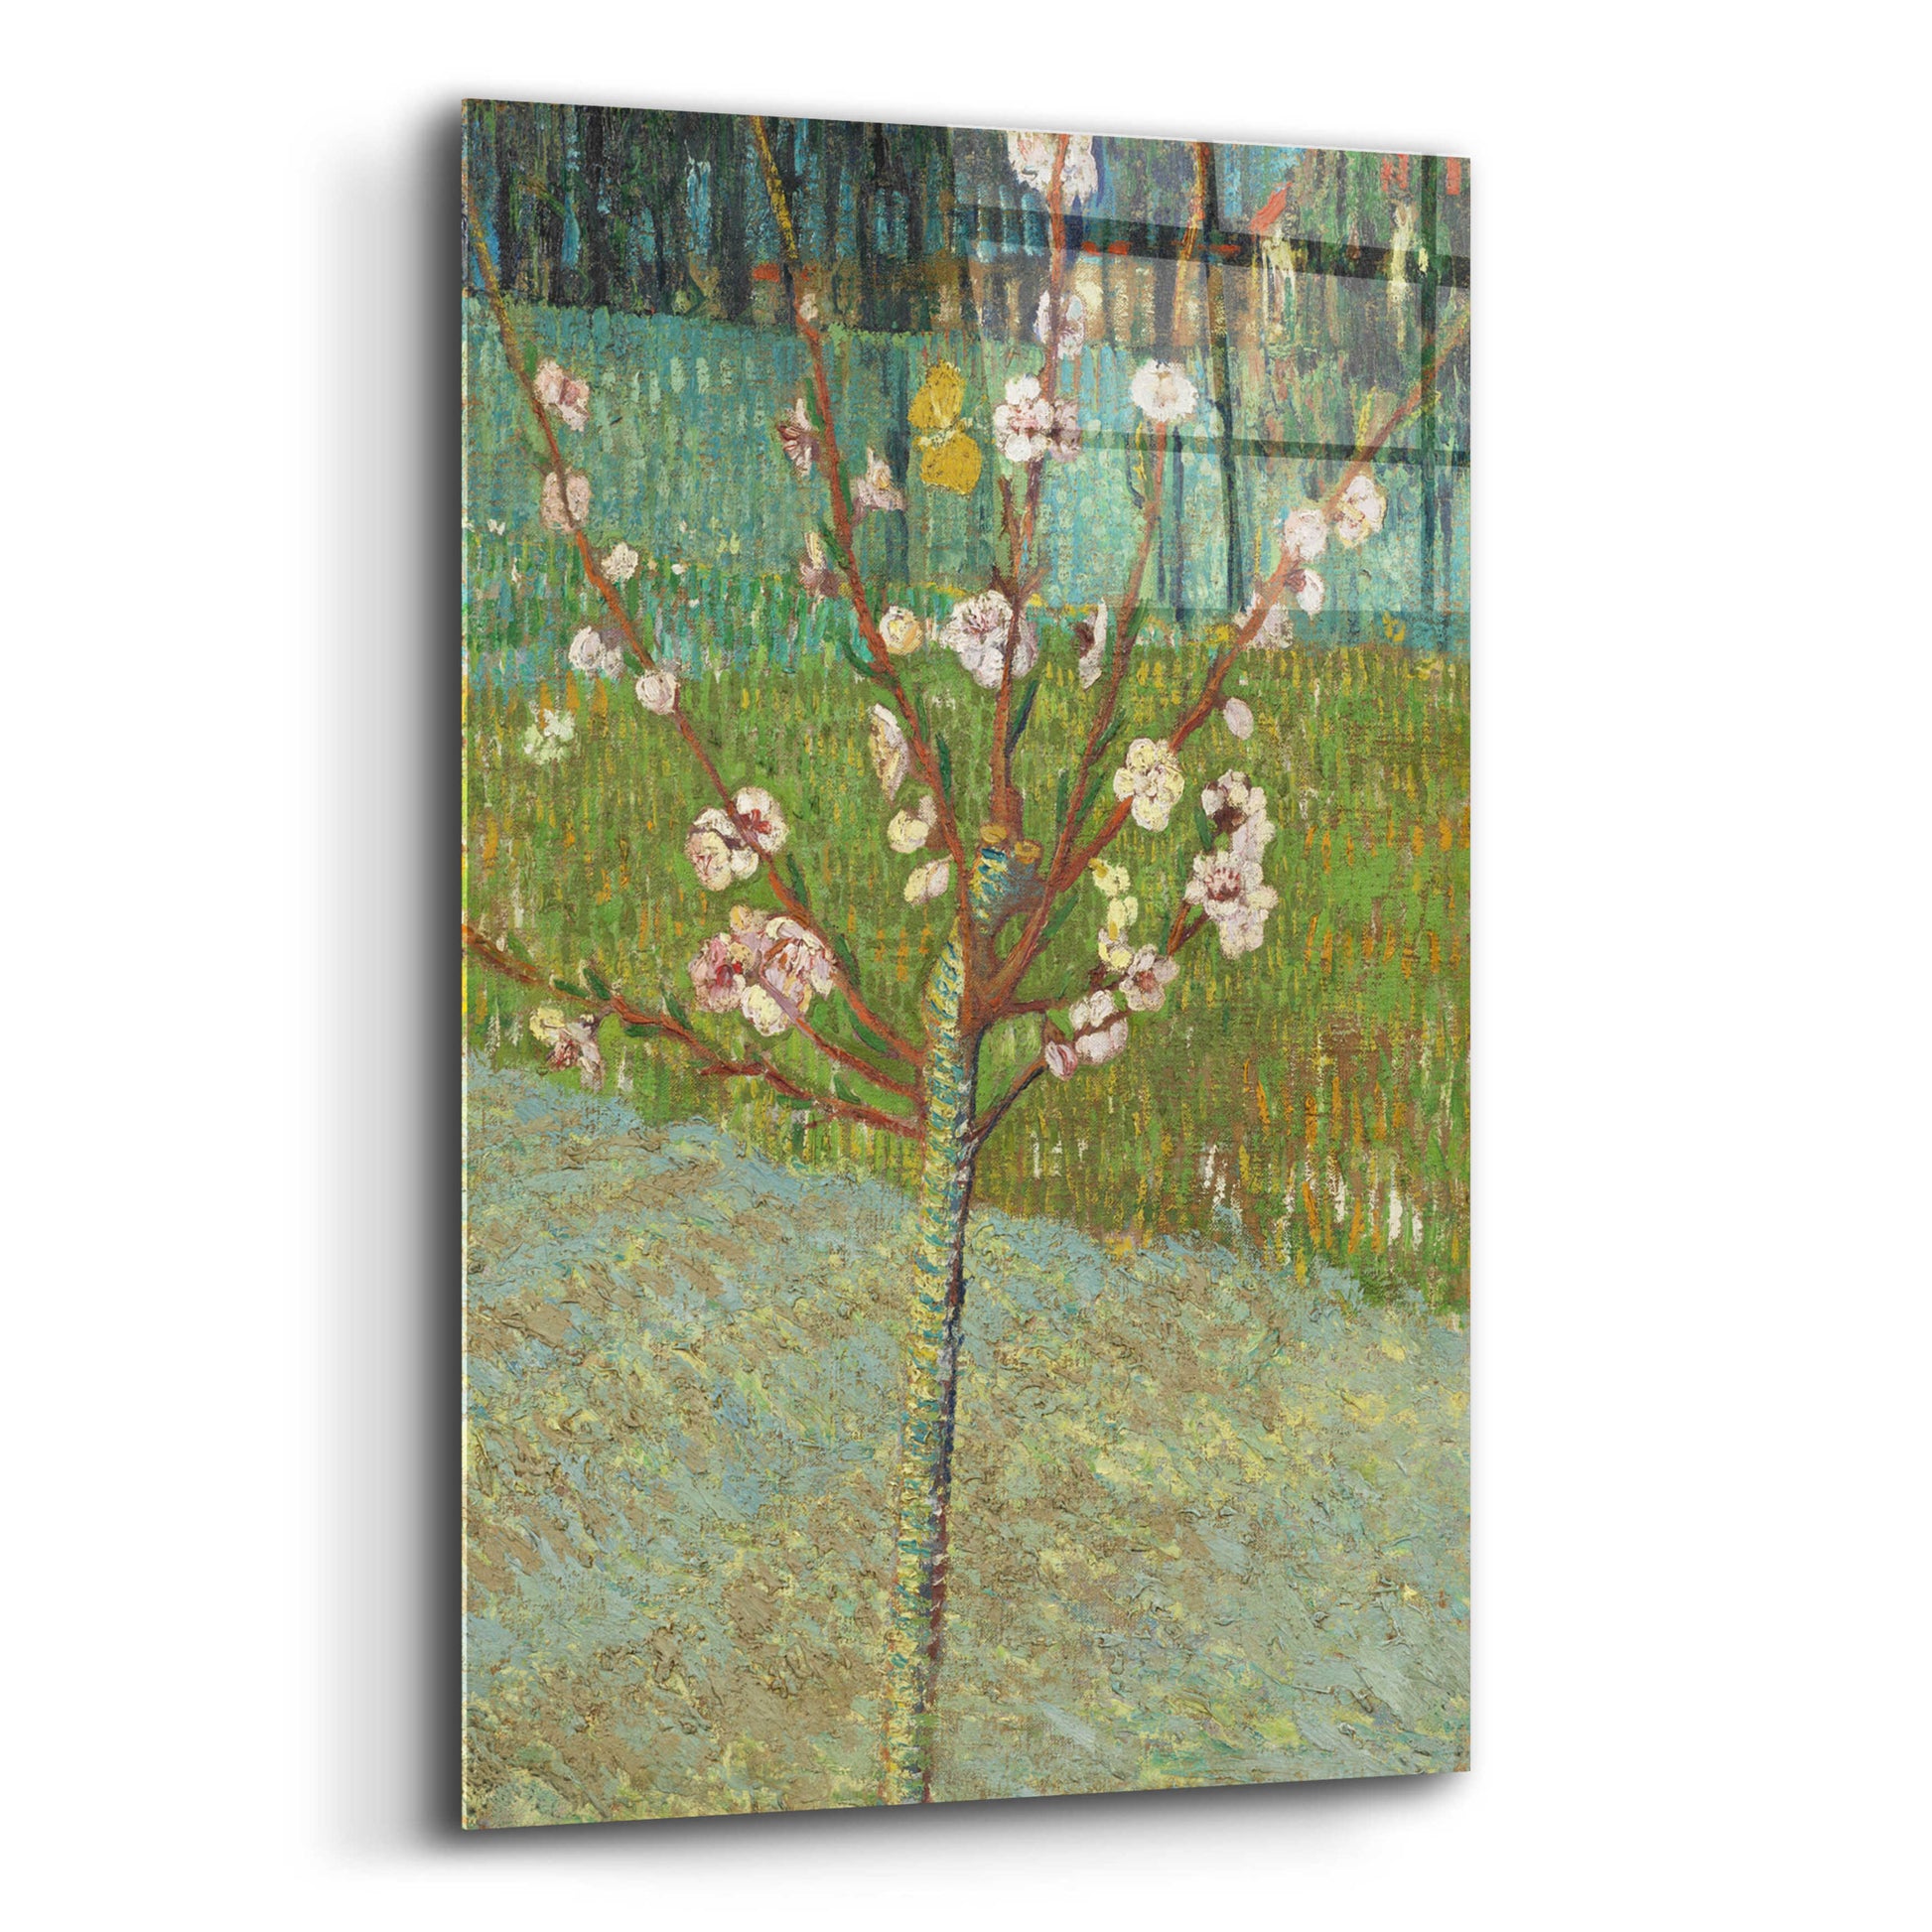 Epic Art 'Peach Tree In Blossom' by Vincent Van Gogh, Acrylic Glass Wall Art,16x24